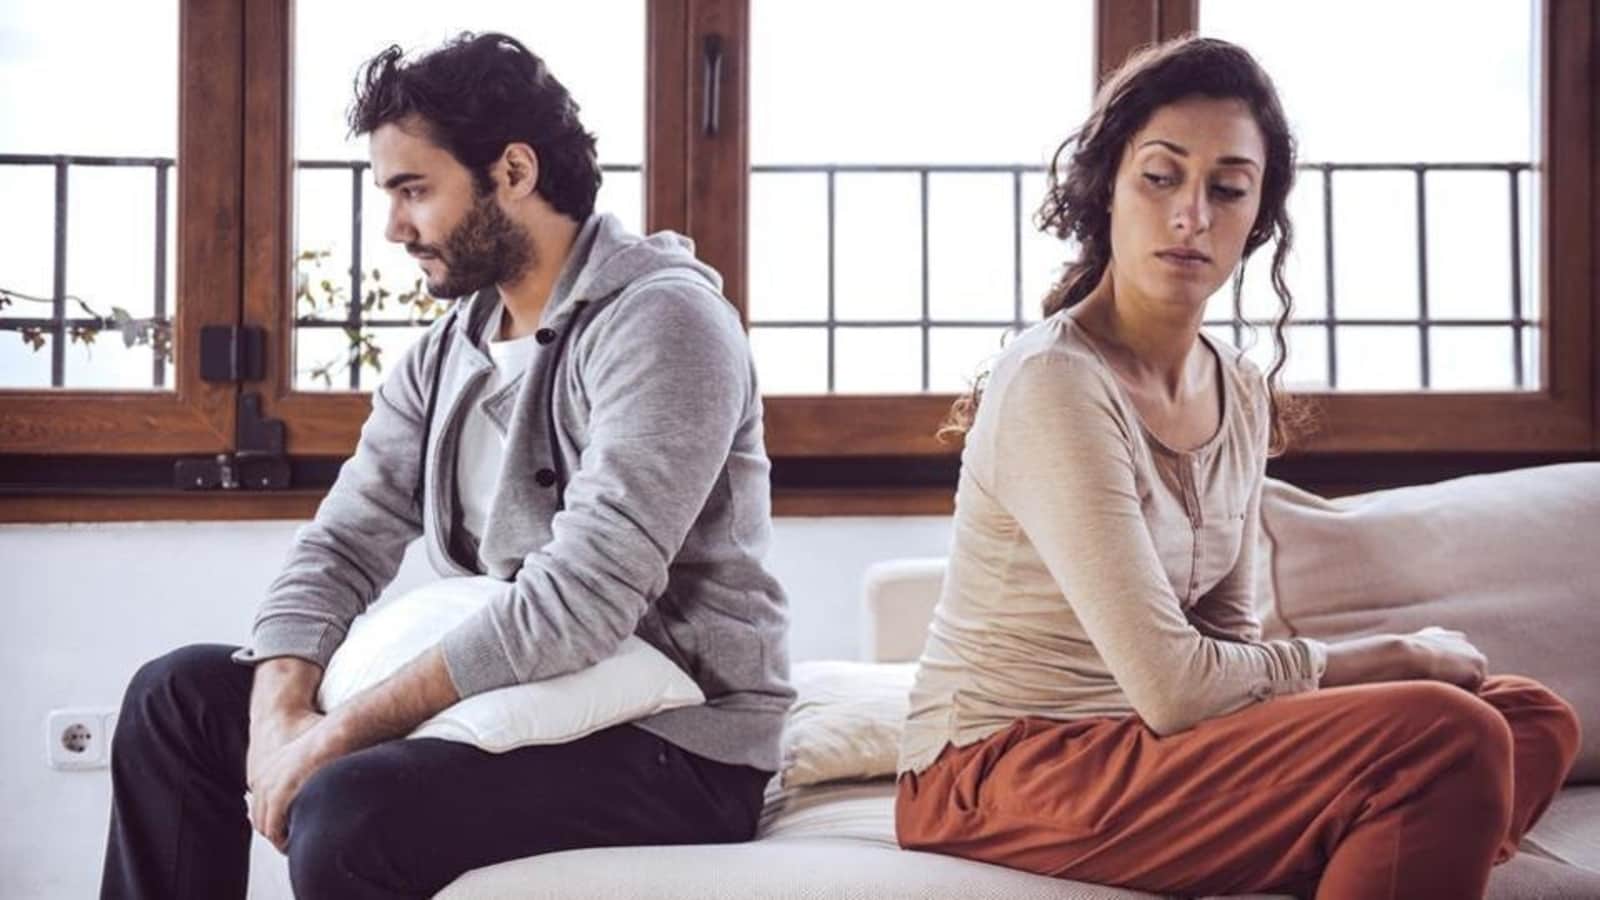 Why do we go for emotionally unavailable partners?